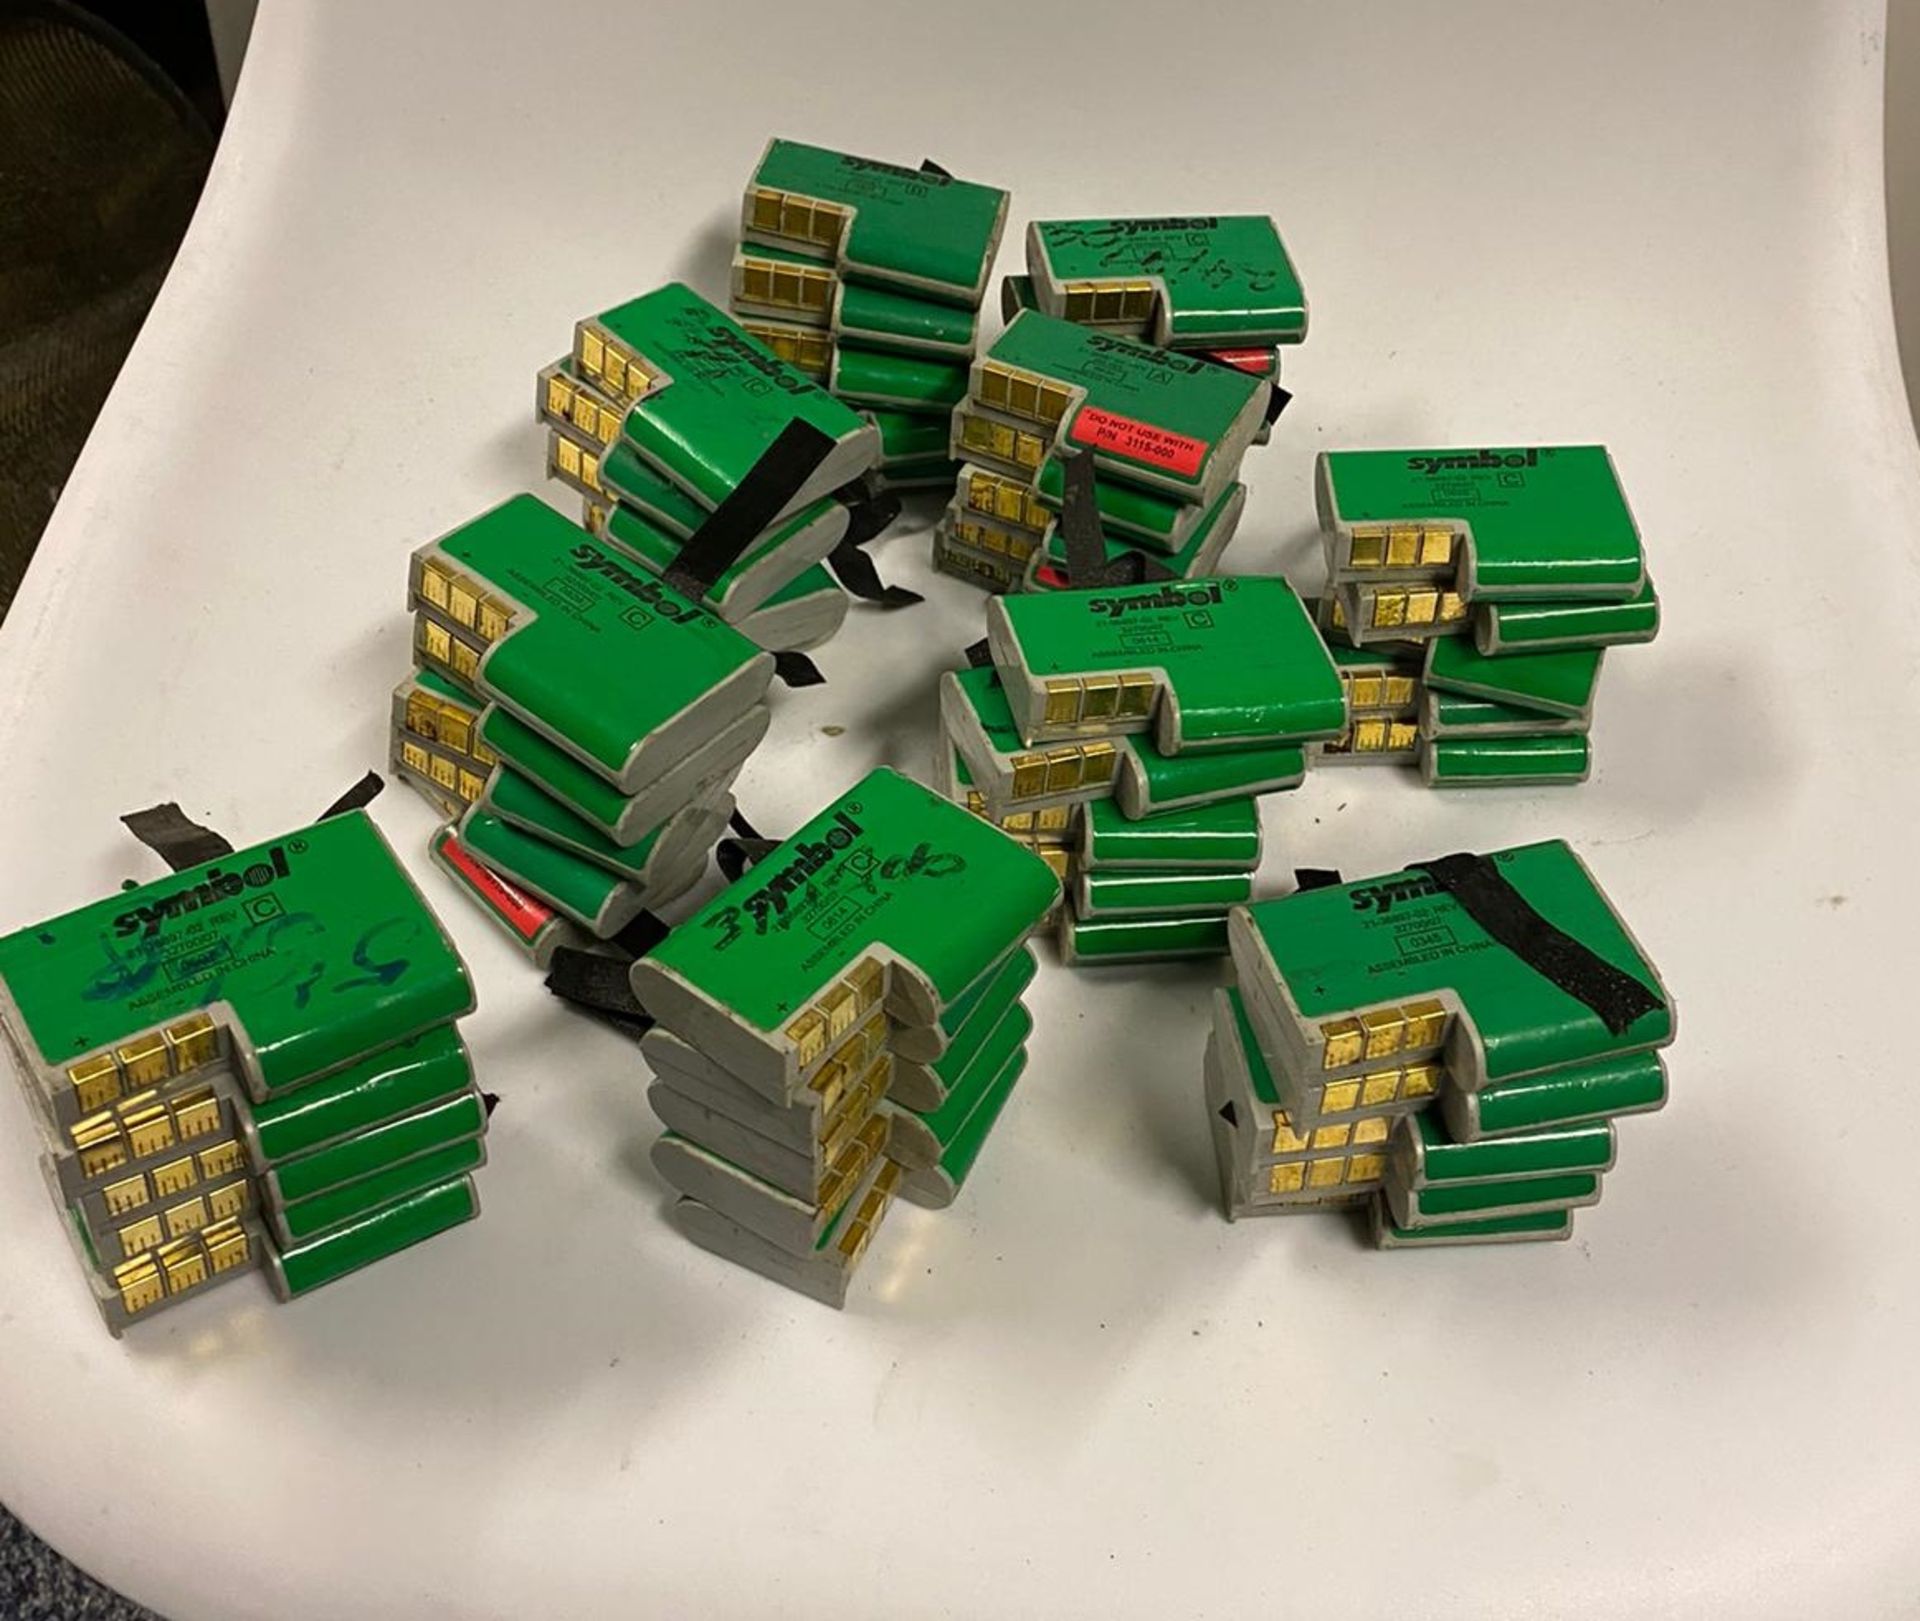 10 x Symbol 21-36897-02 Rechargeable 6.0V Batteries - Used Condition - Location: Altrincham WA14 - - Image 2 of 5